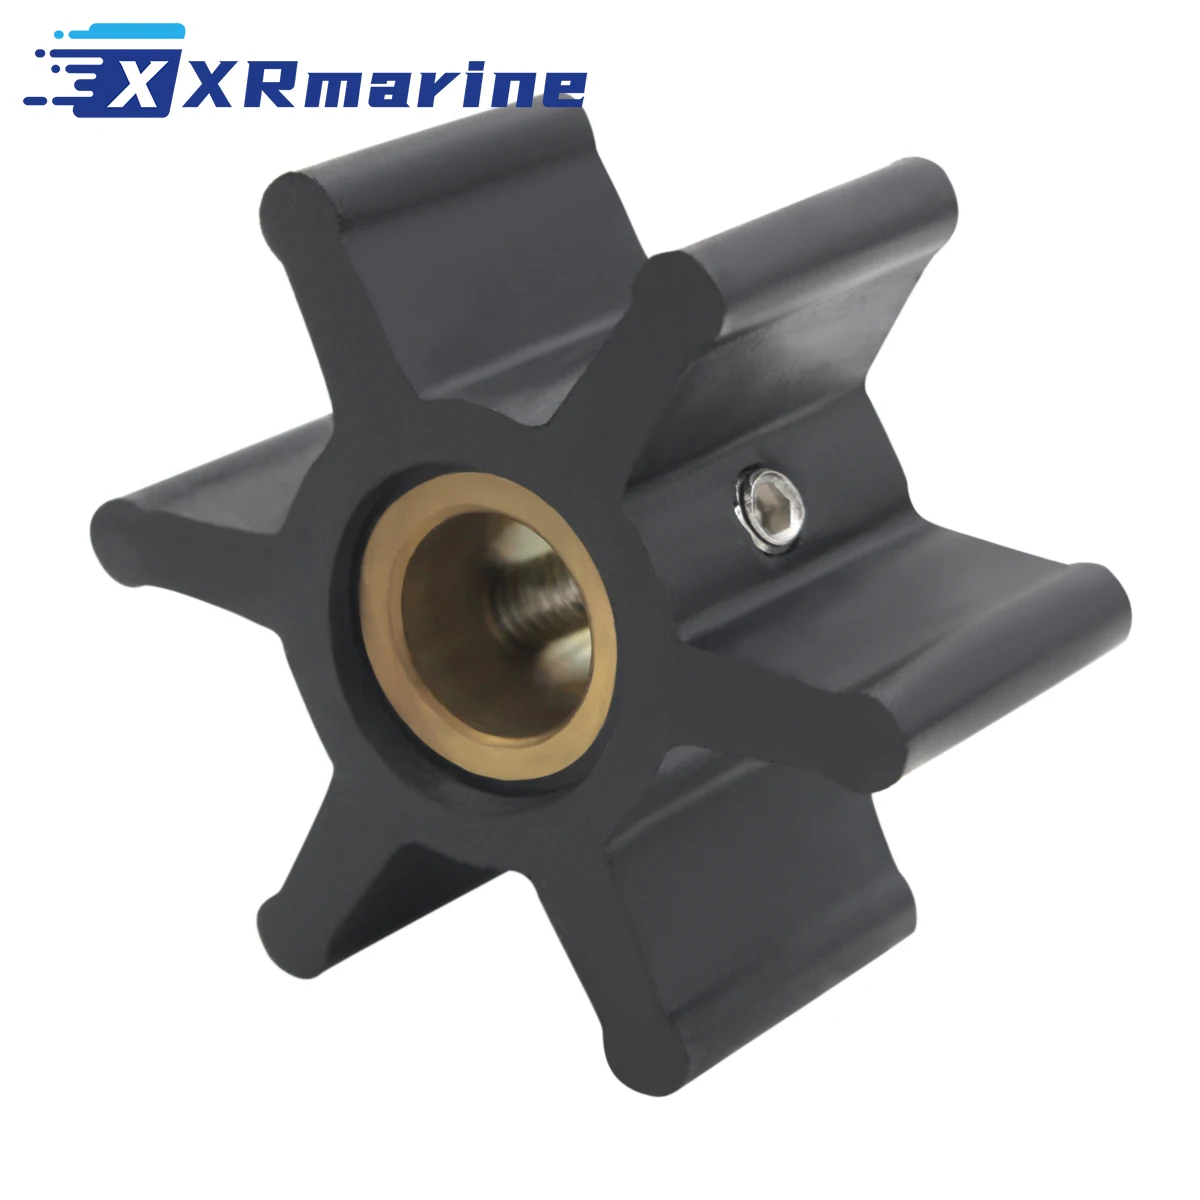 4528-0001 Water Pump Flexible Impeller for Jabsco 4528-0001P 4528-0001-P Replaces Sirra 18-3079